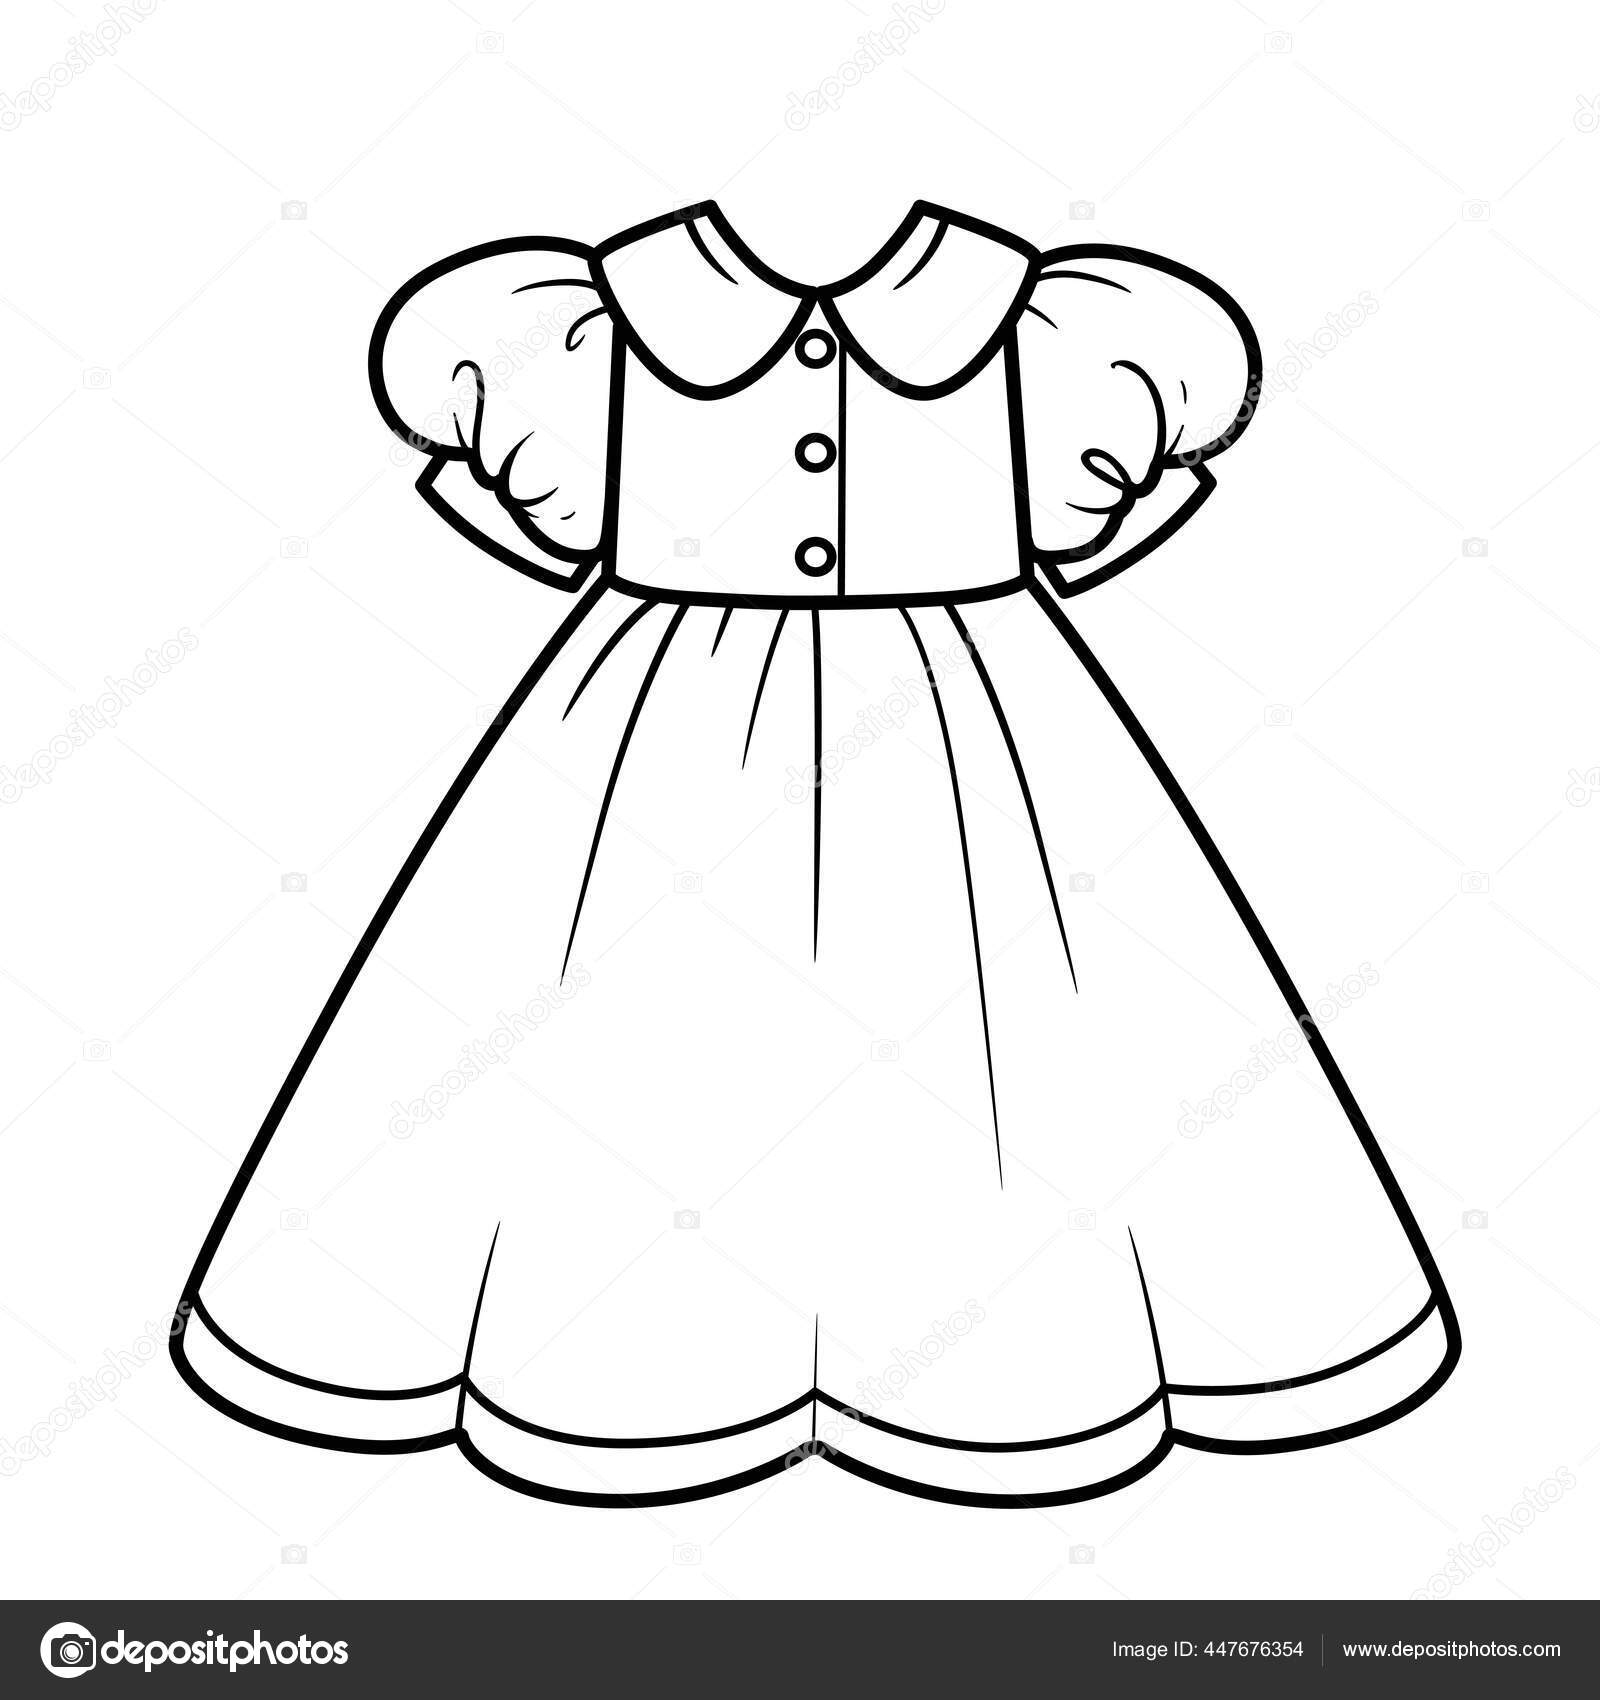 Light Summer Romantic Dress Outline For Coloring On A White Background  Stock Illustration - Download Image Now - iStock